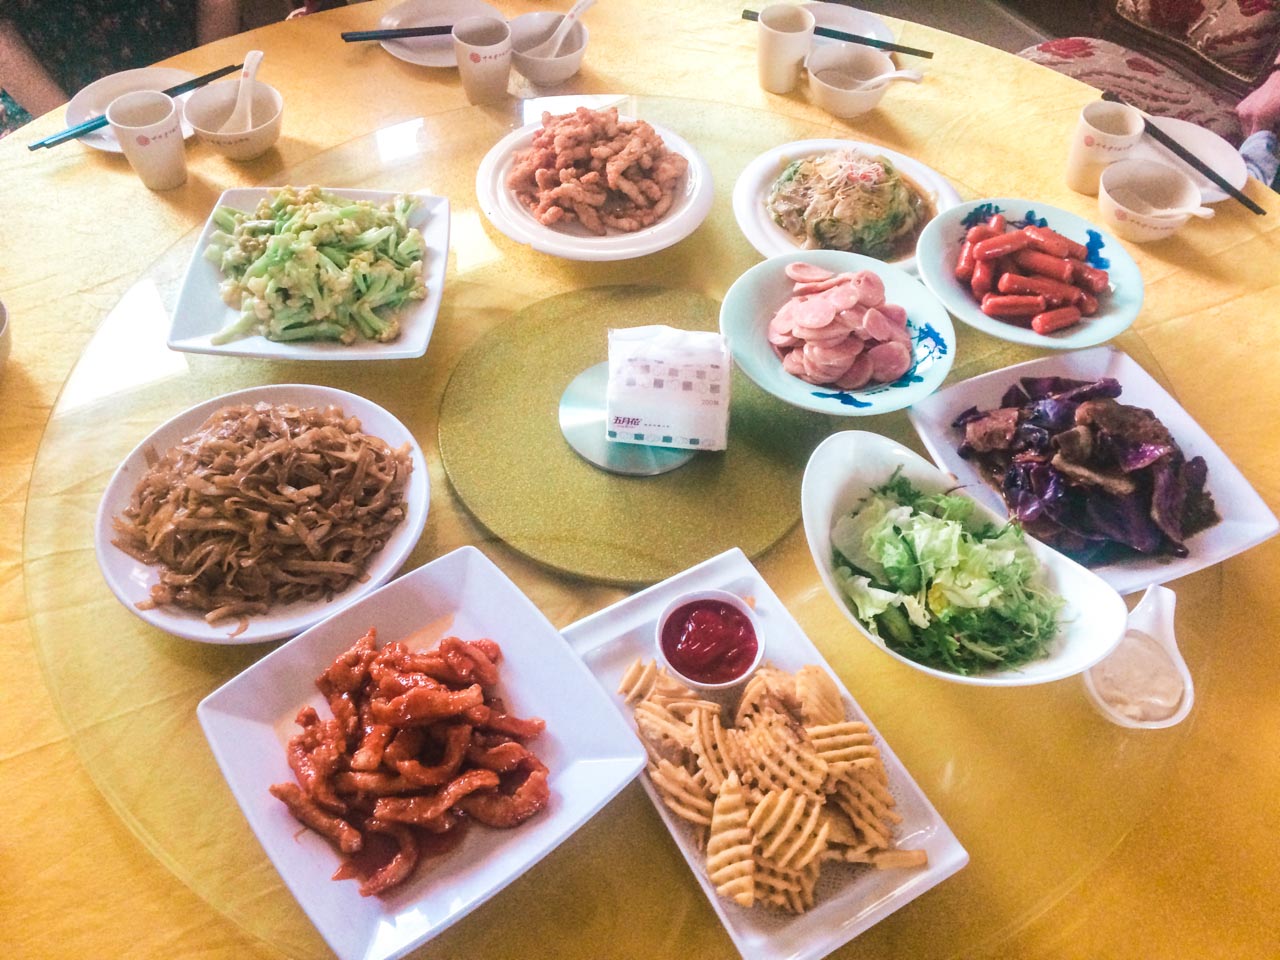 Waffle cut chips and various Chinese dishes on a Lazy Susan rotating table